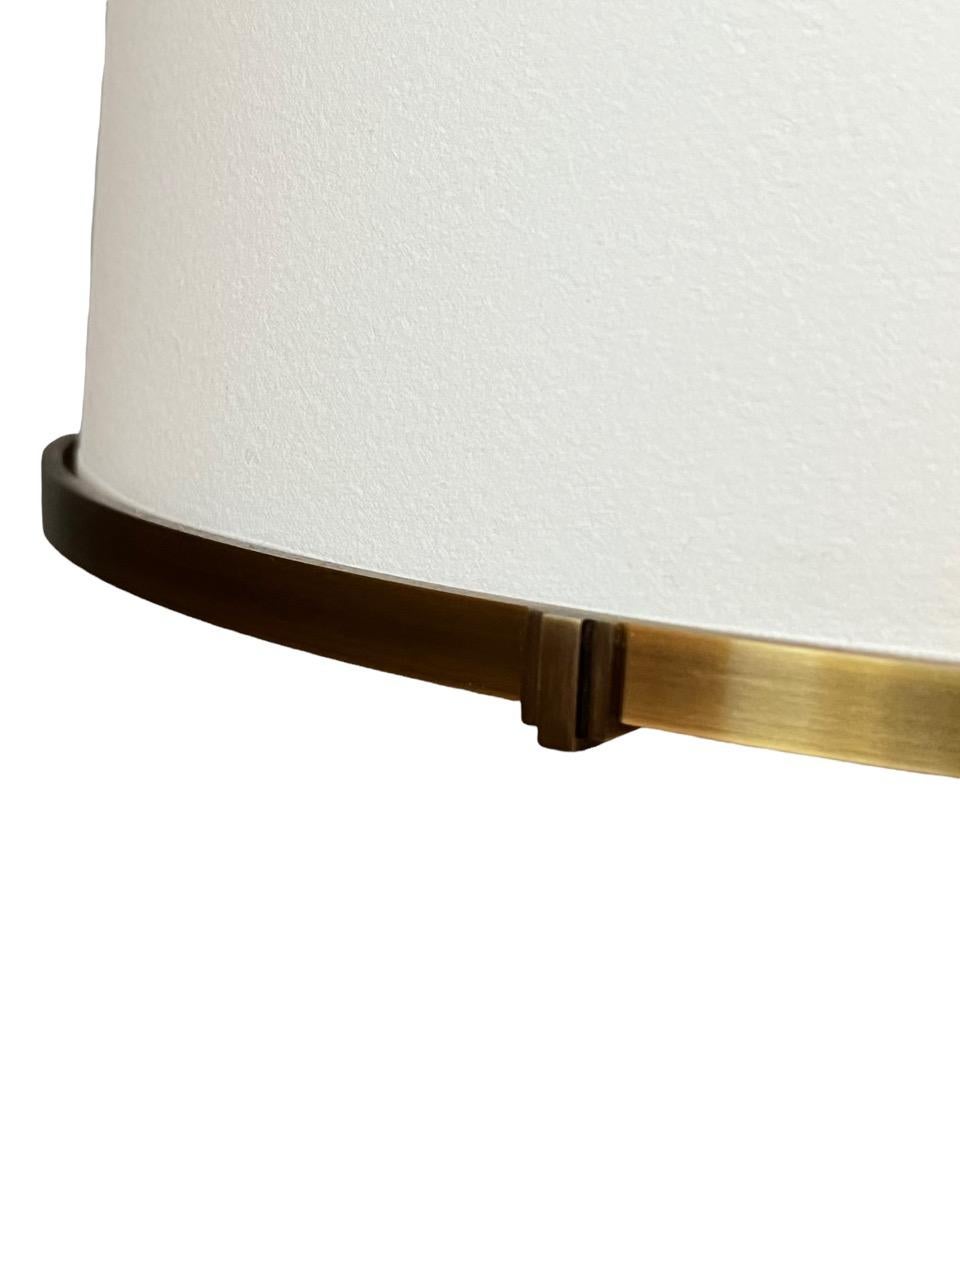 Contemporary Pair of Side Table Lamps, Solid Brass by Designer Solis Betancourt 11